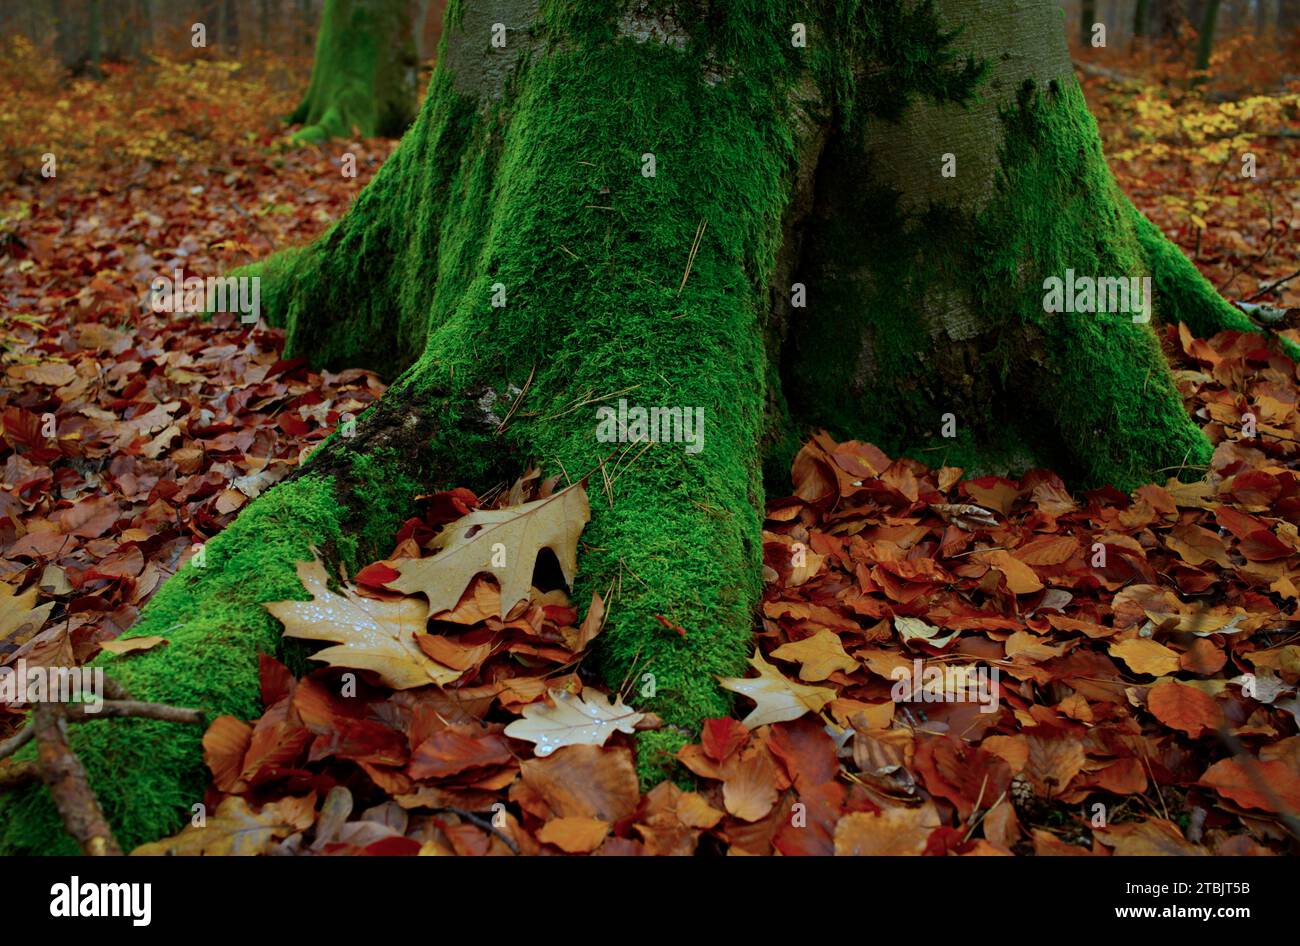 At the green mossy big foot of a tree trunk Stock Photo